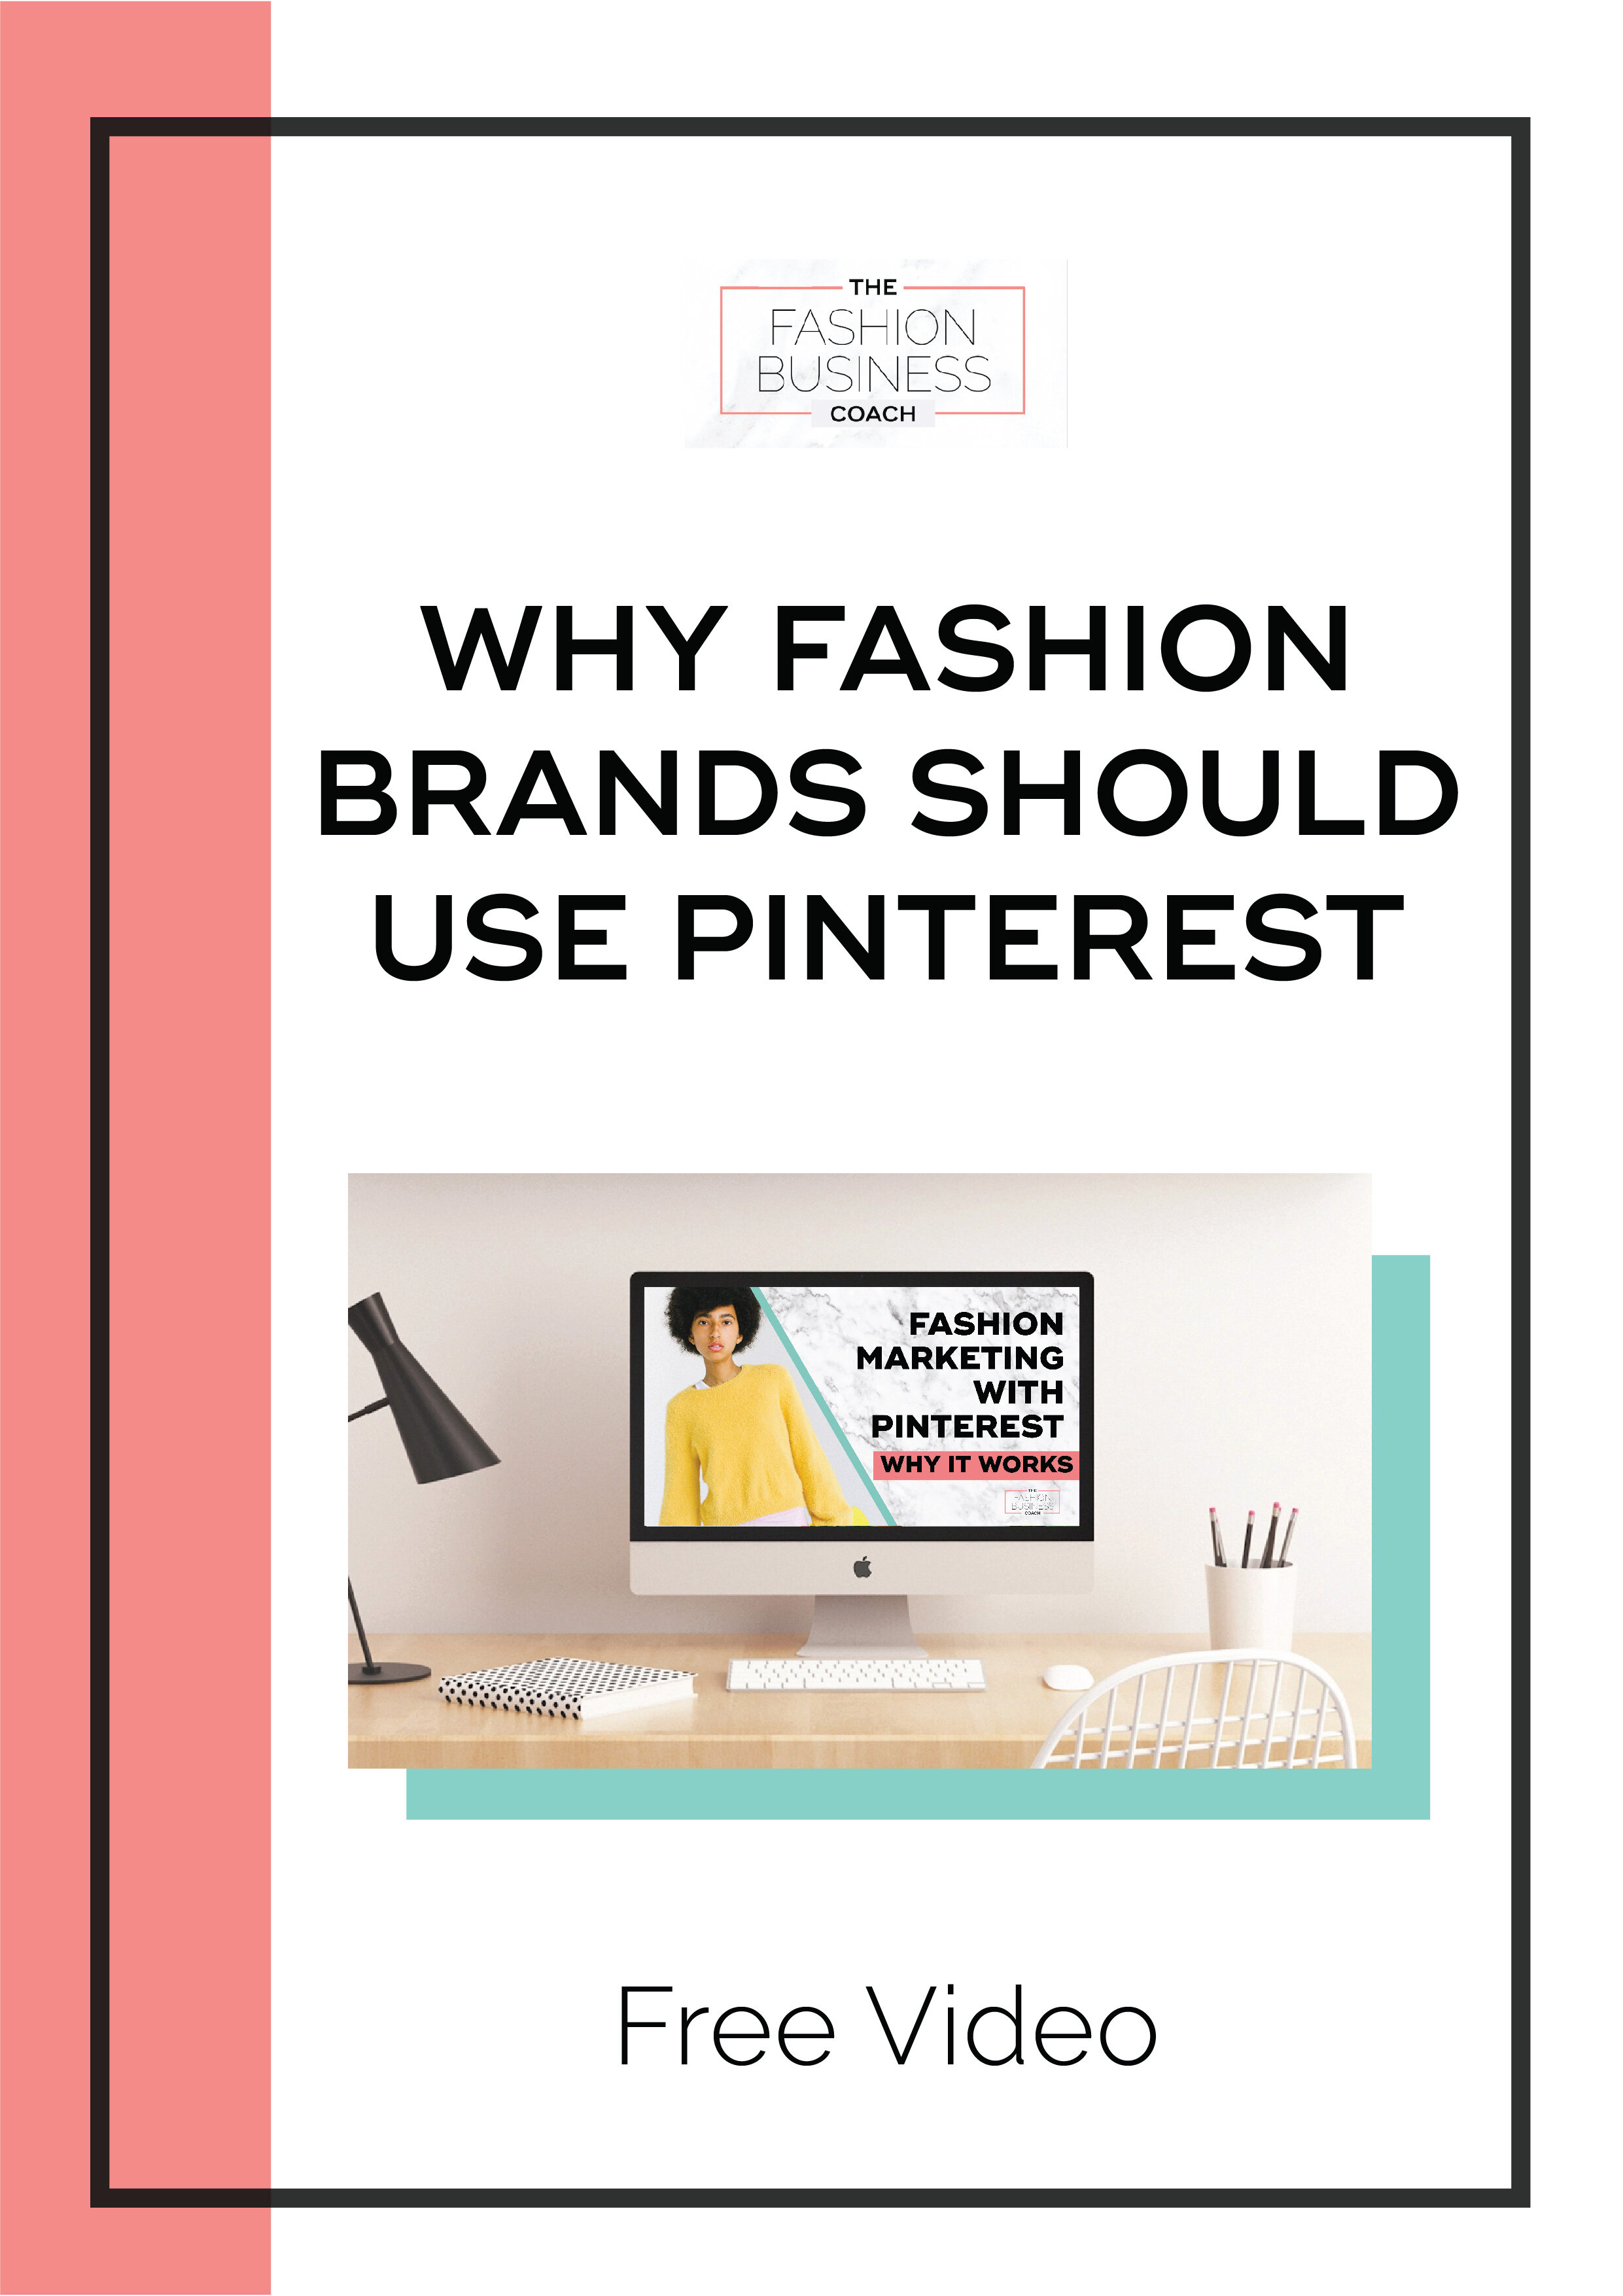 Why Fashion Brands Should Use Pinterest1.jpg